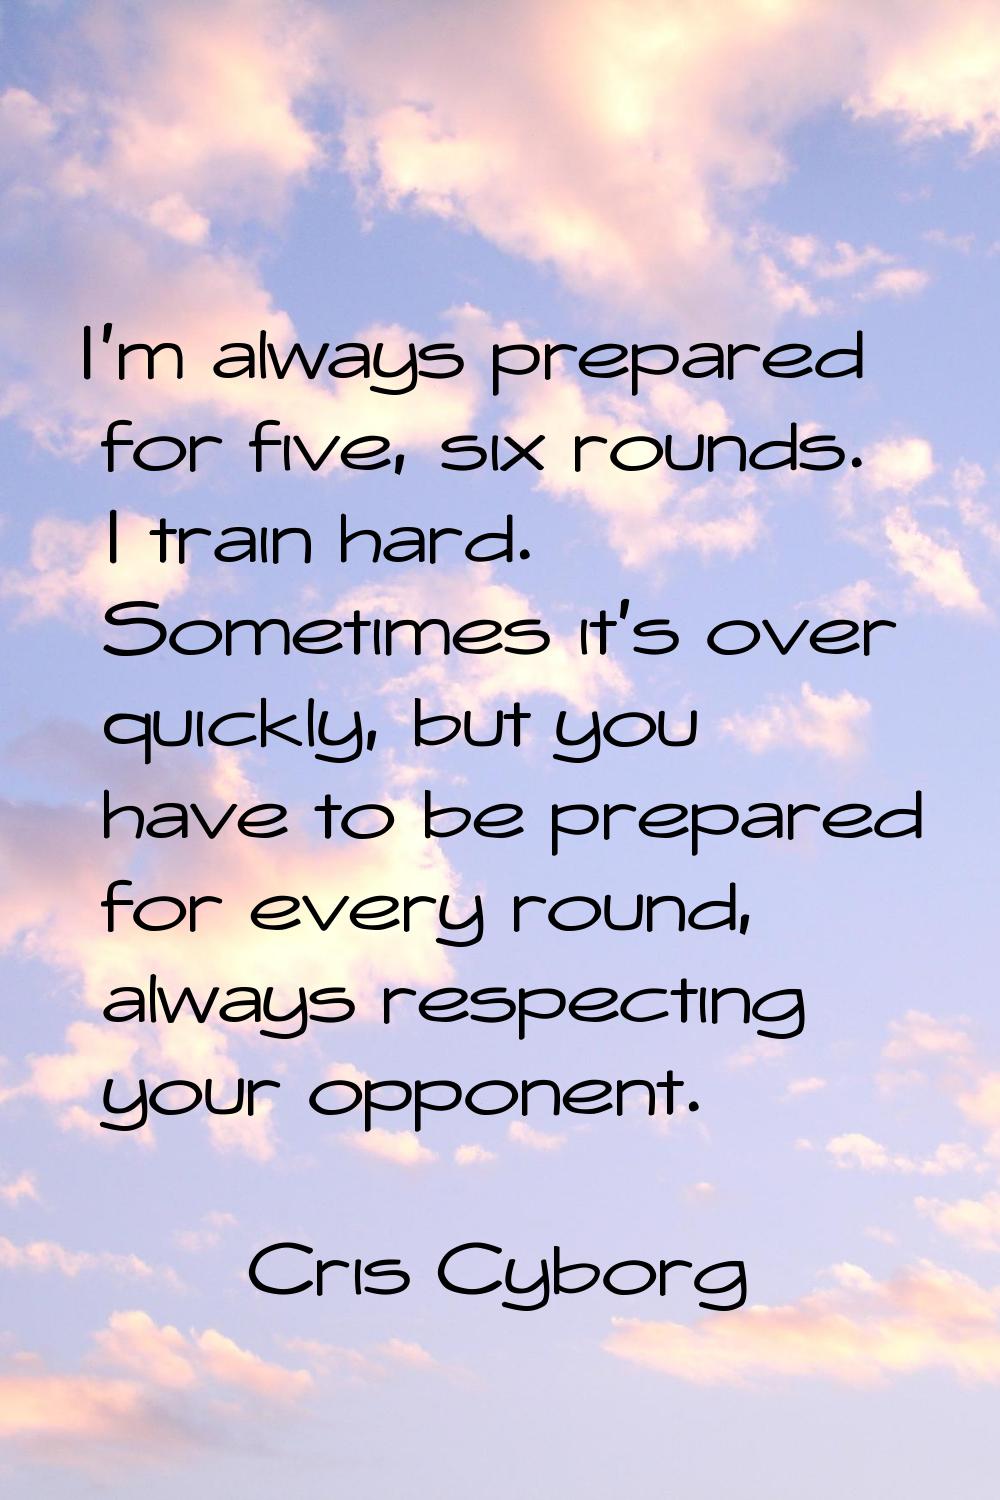 I'm always prepared for five, six rounds. I train hard. Sometimes it's over quickly, but you have t